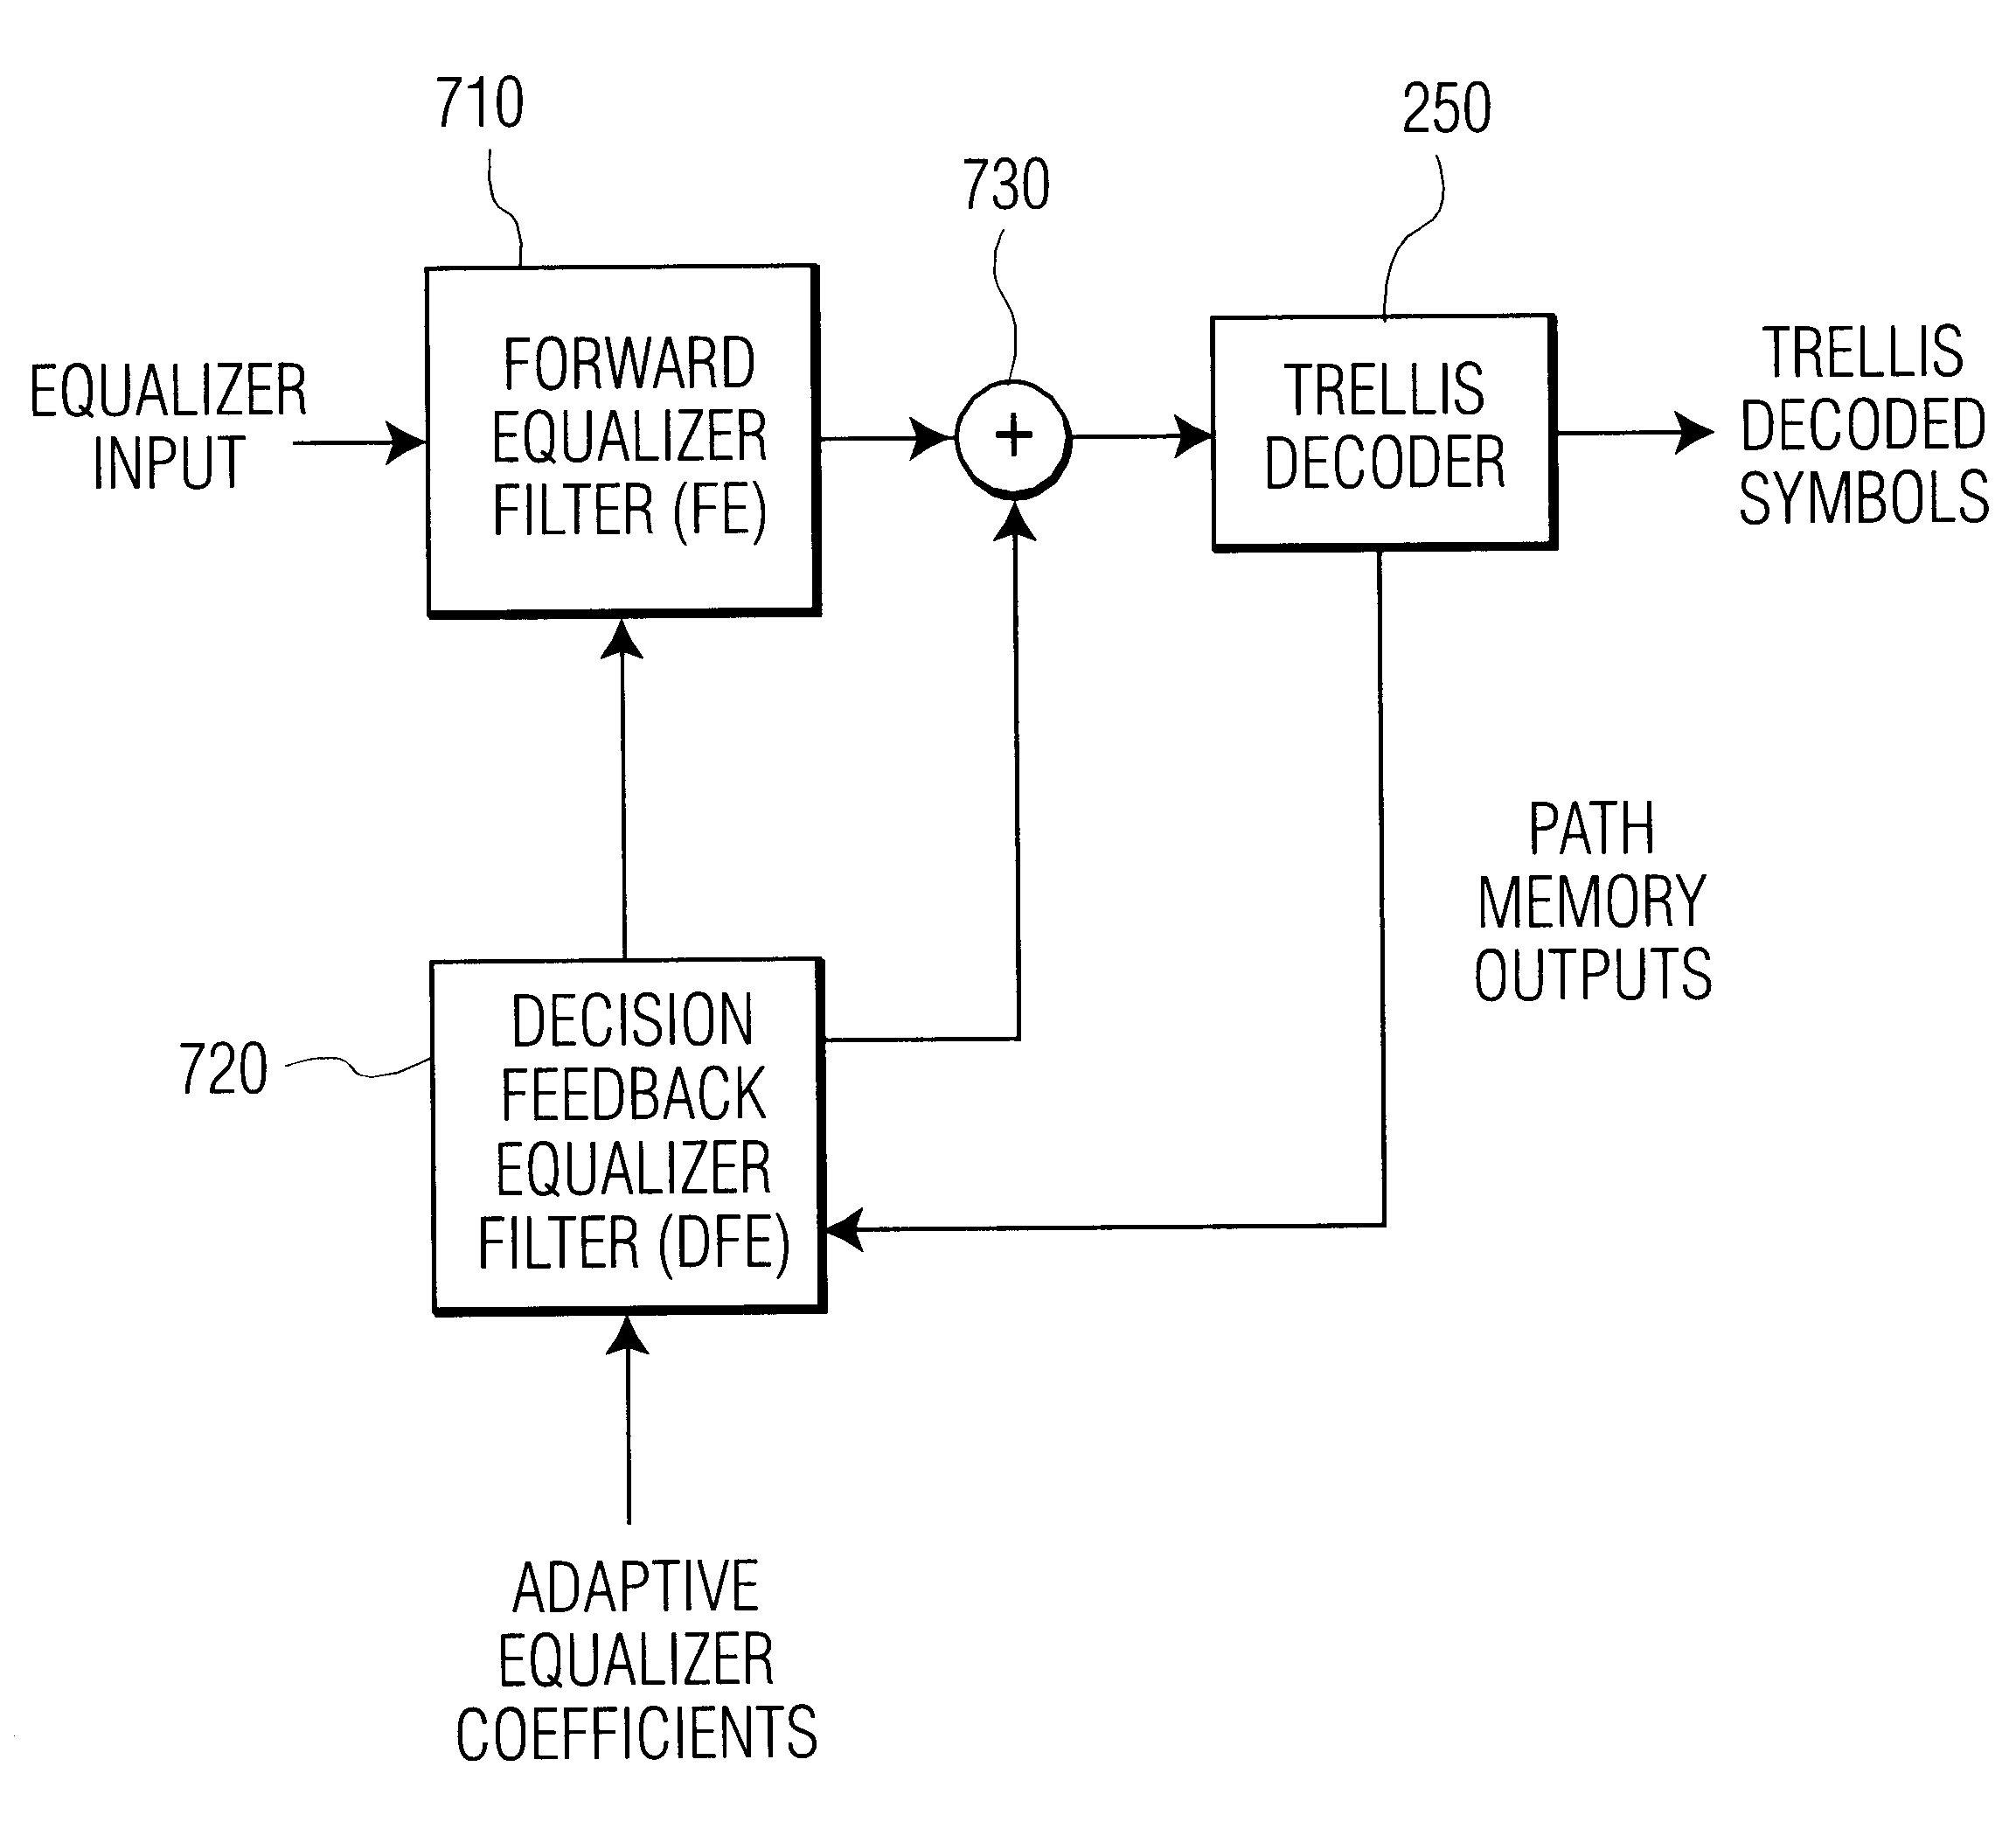 Generation of decision feedback equalizer data using trellis decoder traceback output in an ATSC HDTV receiver